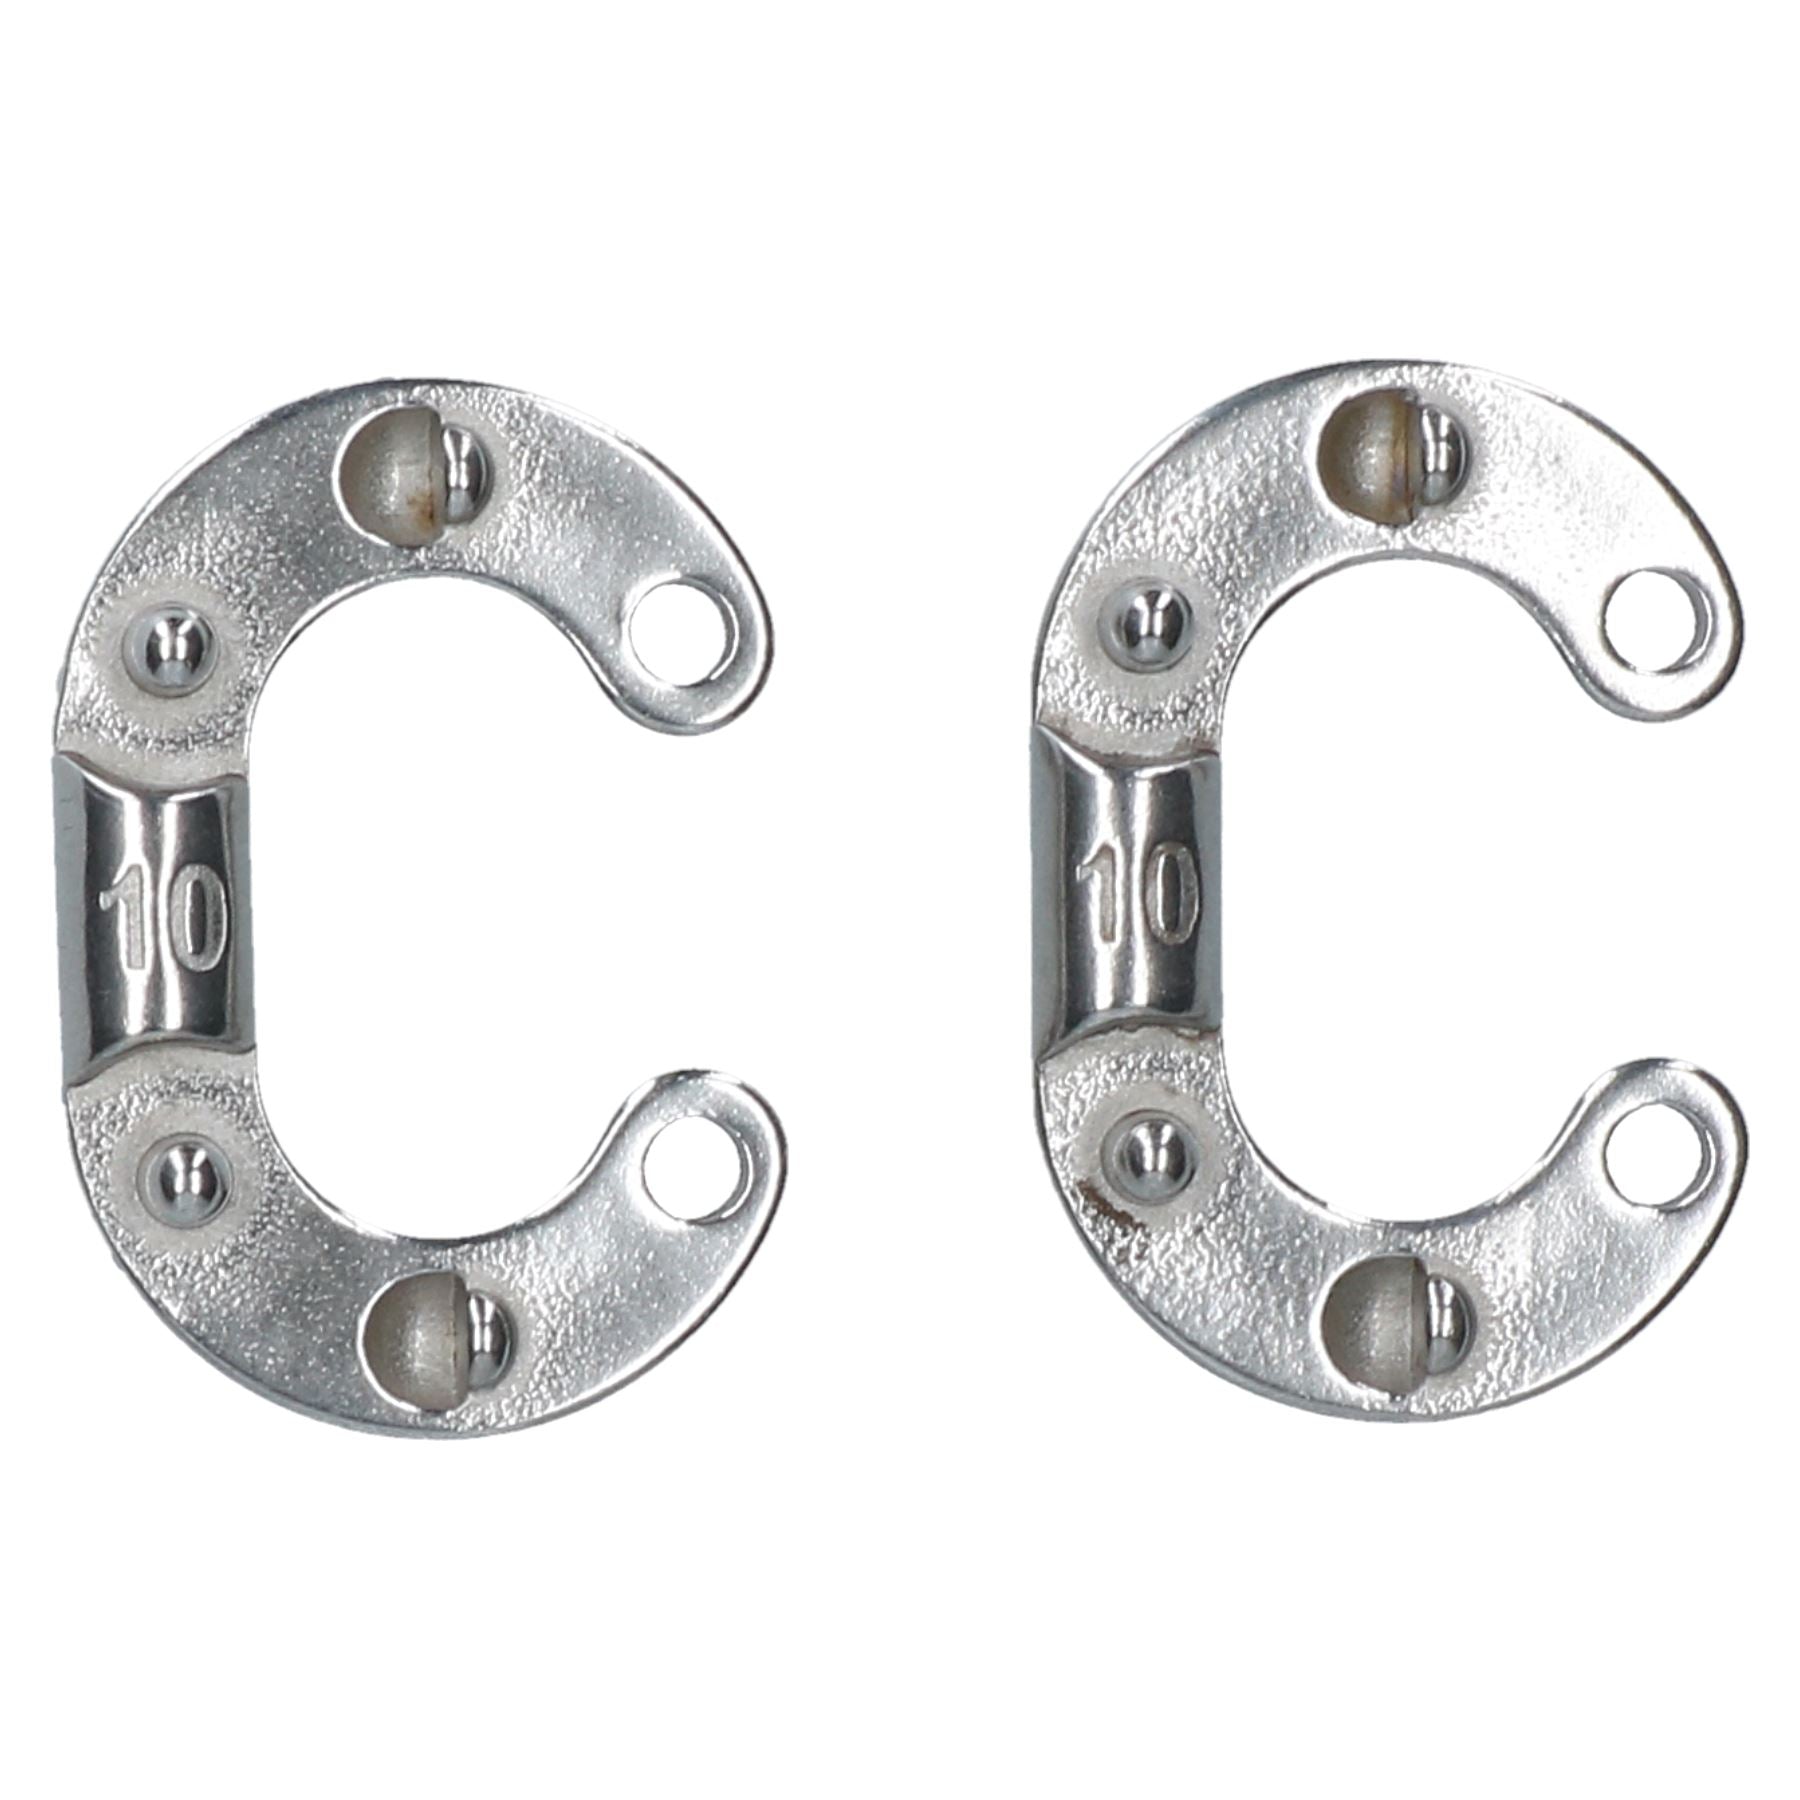 Chain Connecting Link 6mm Marine Grade Stainless Steel Split Join Shackle